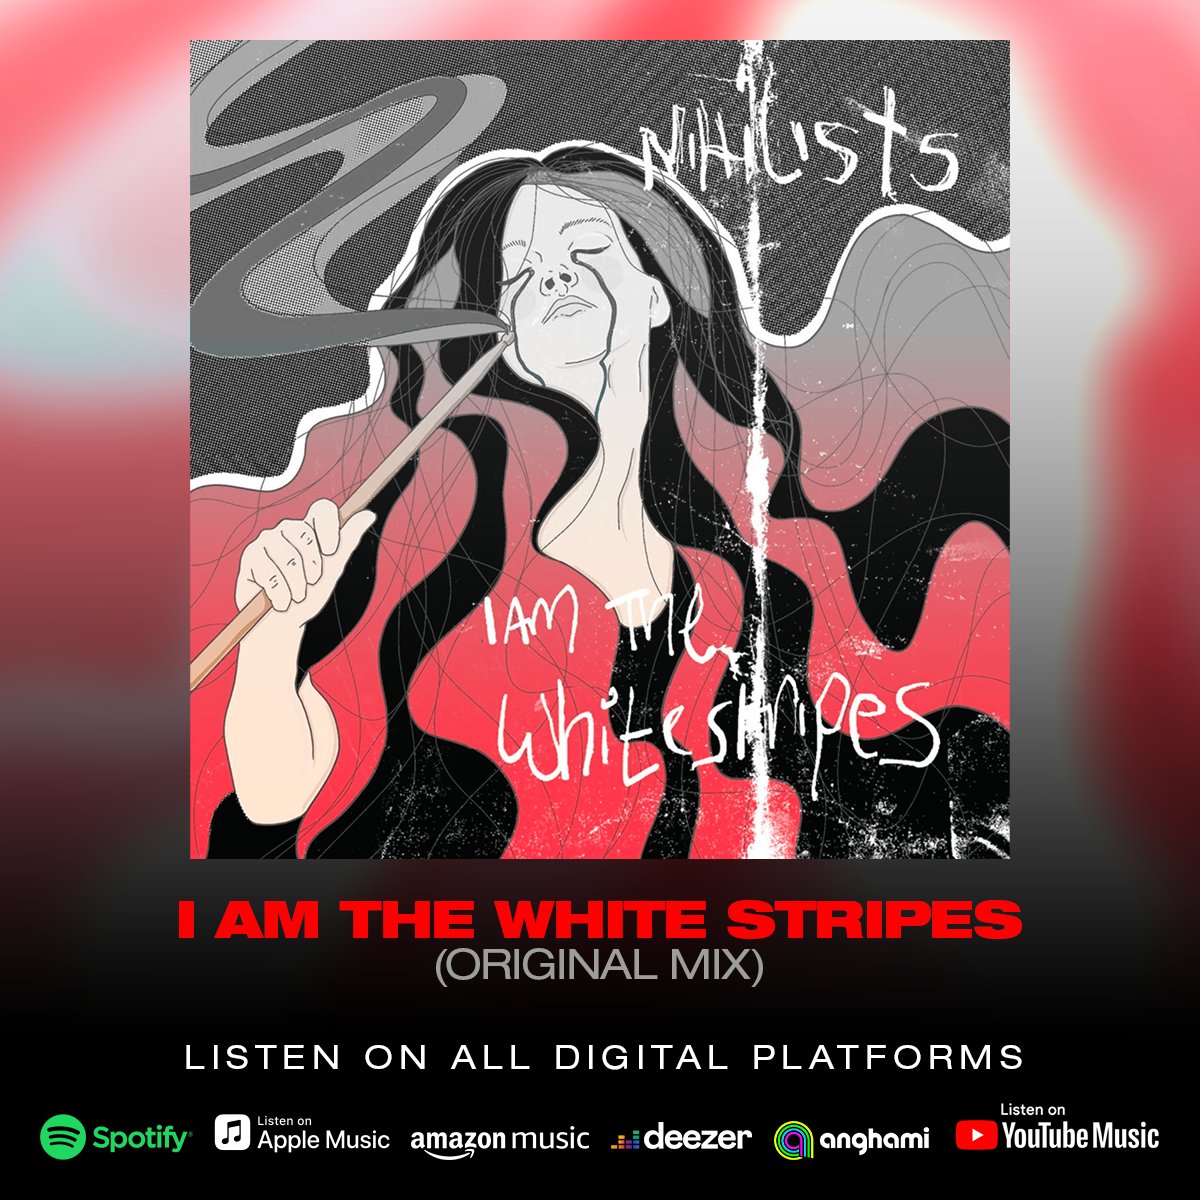 Now available 'I Am The White Stripes' ORIGINAL MIX bfan.link/i-am-the-white… More new music on its way. Stay tuned... ----- @endof_thetrail